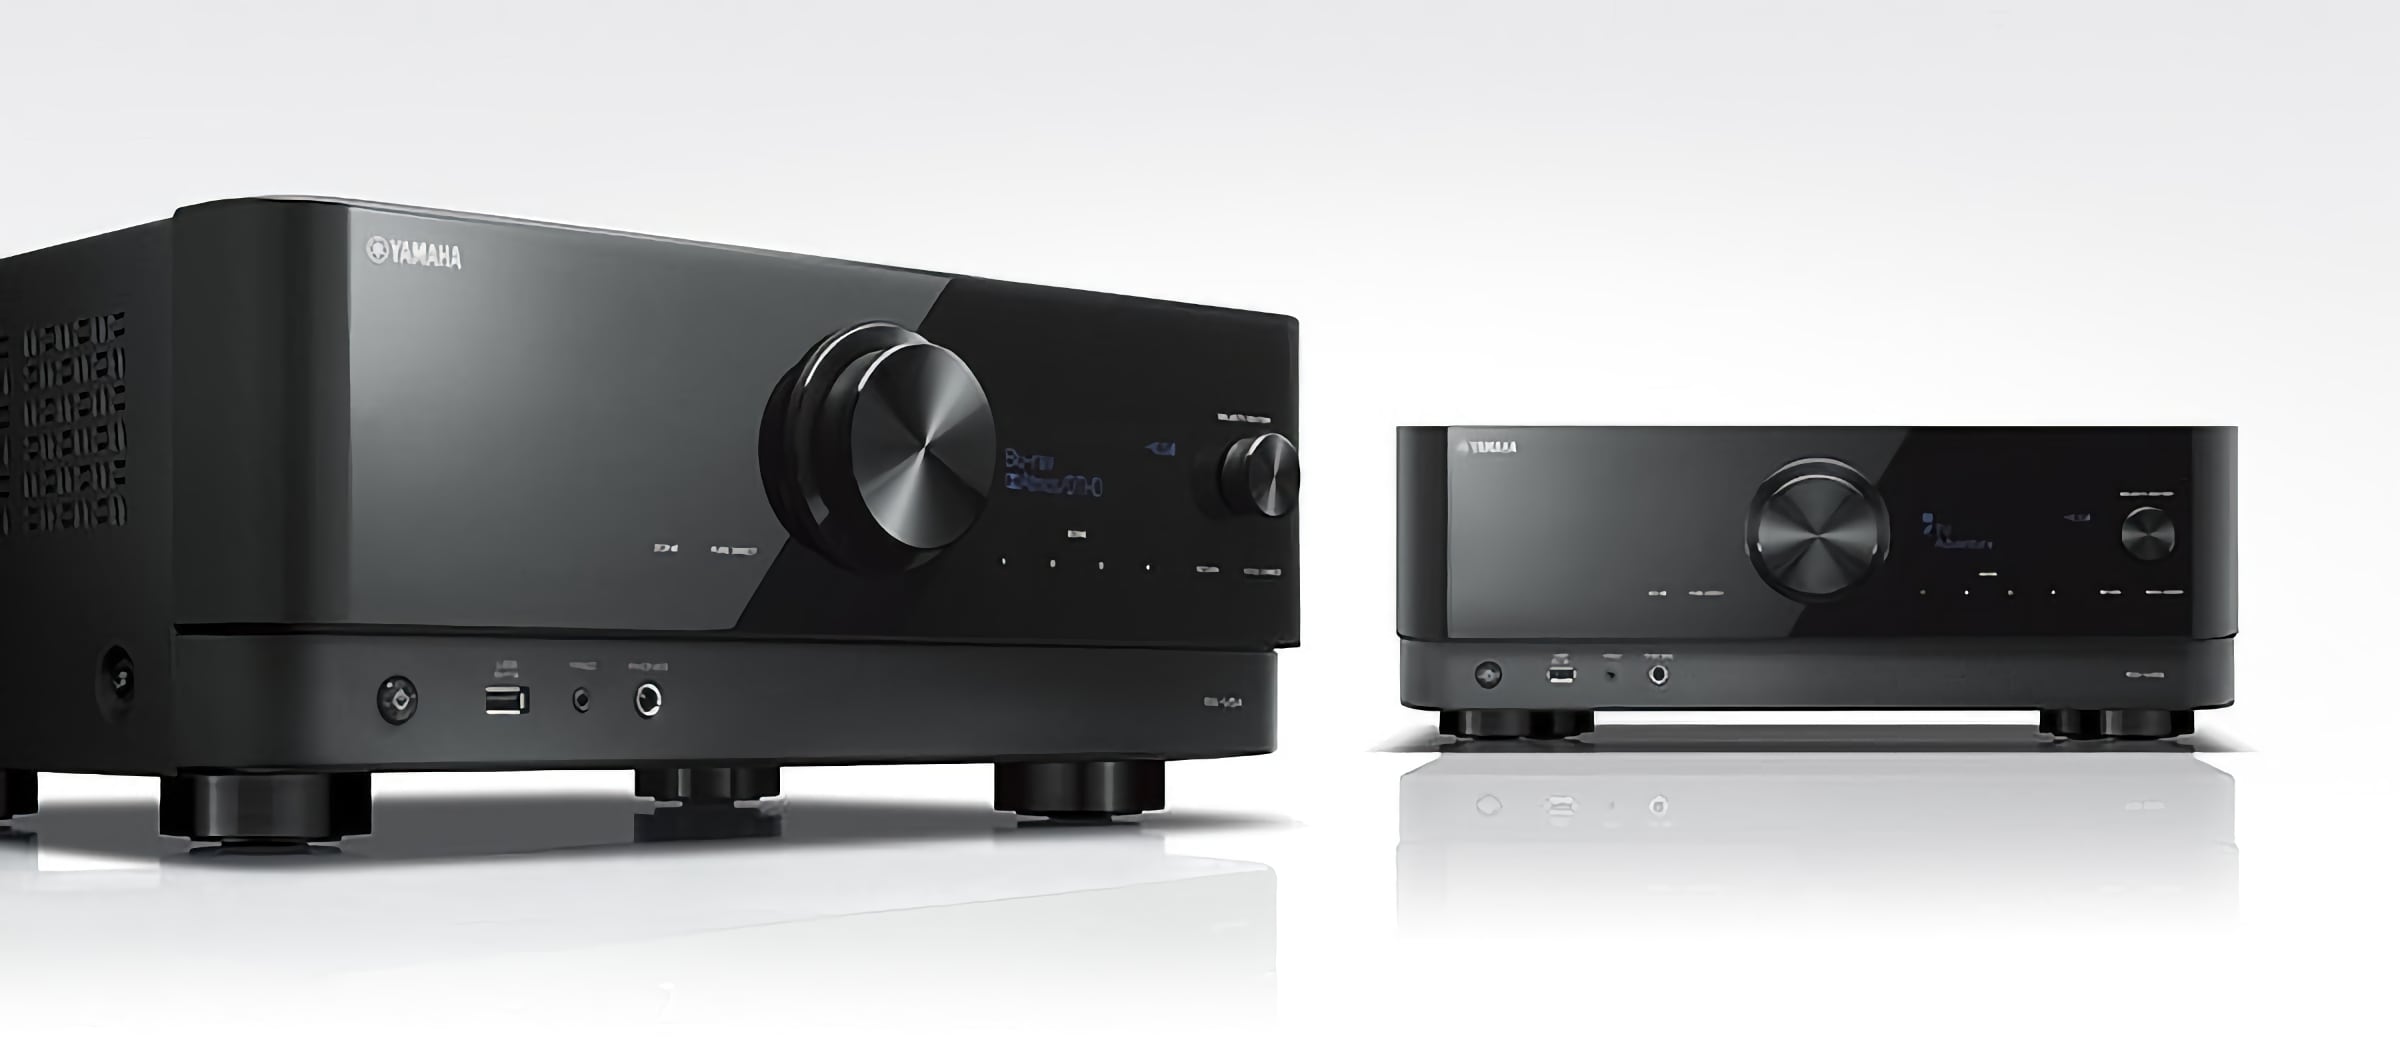 Yamaha launches AV receivers with multiple HDMI 2.1 inputs - FlatpanelsHD